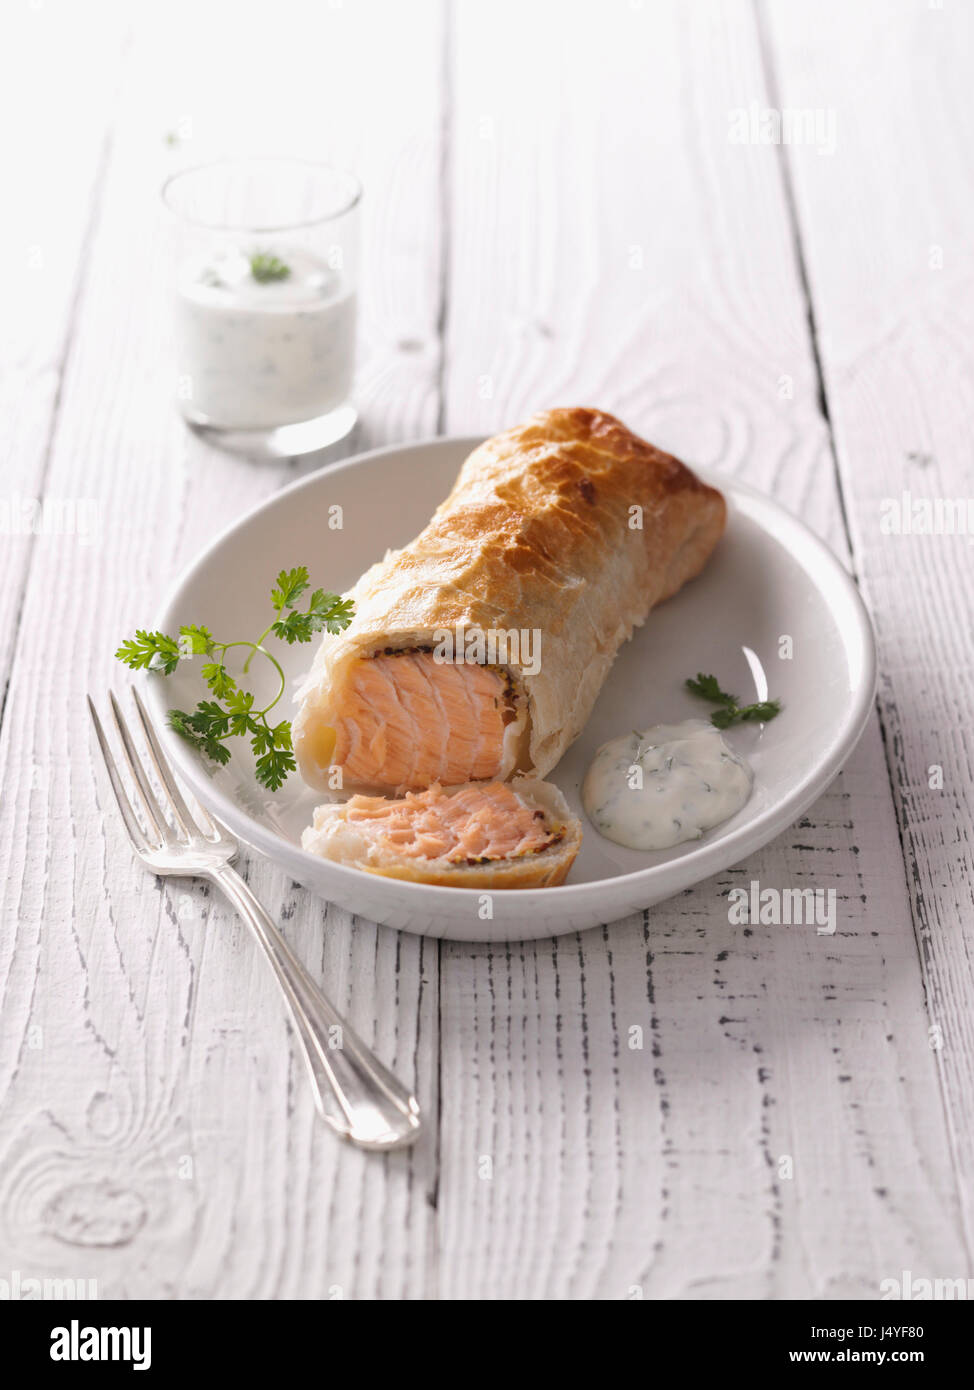 Salmon in puff pastry crust Stock Photo